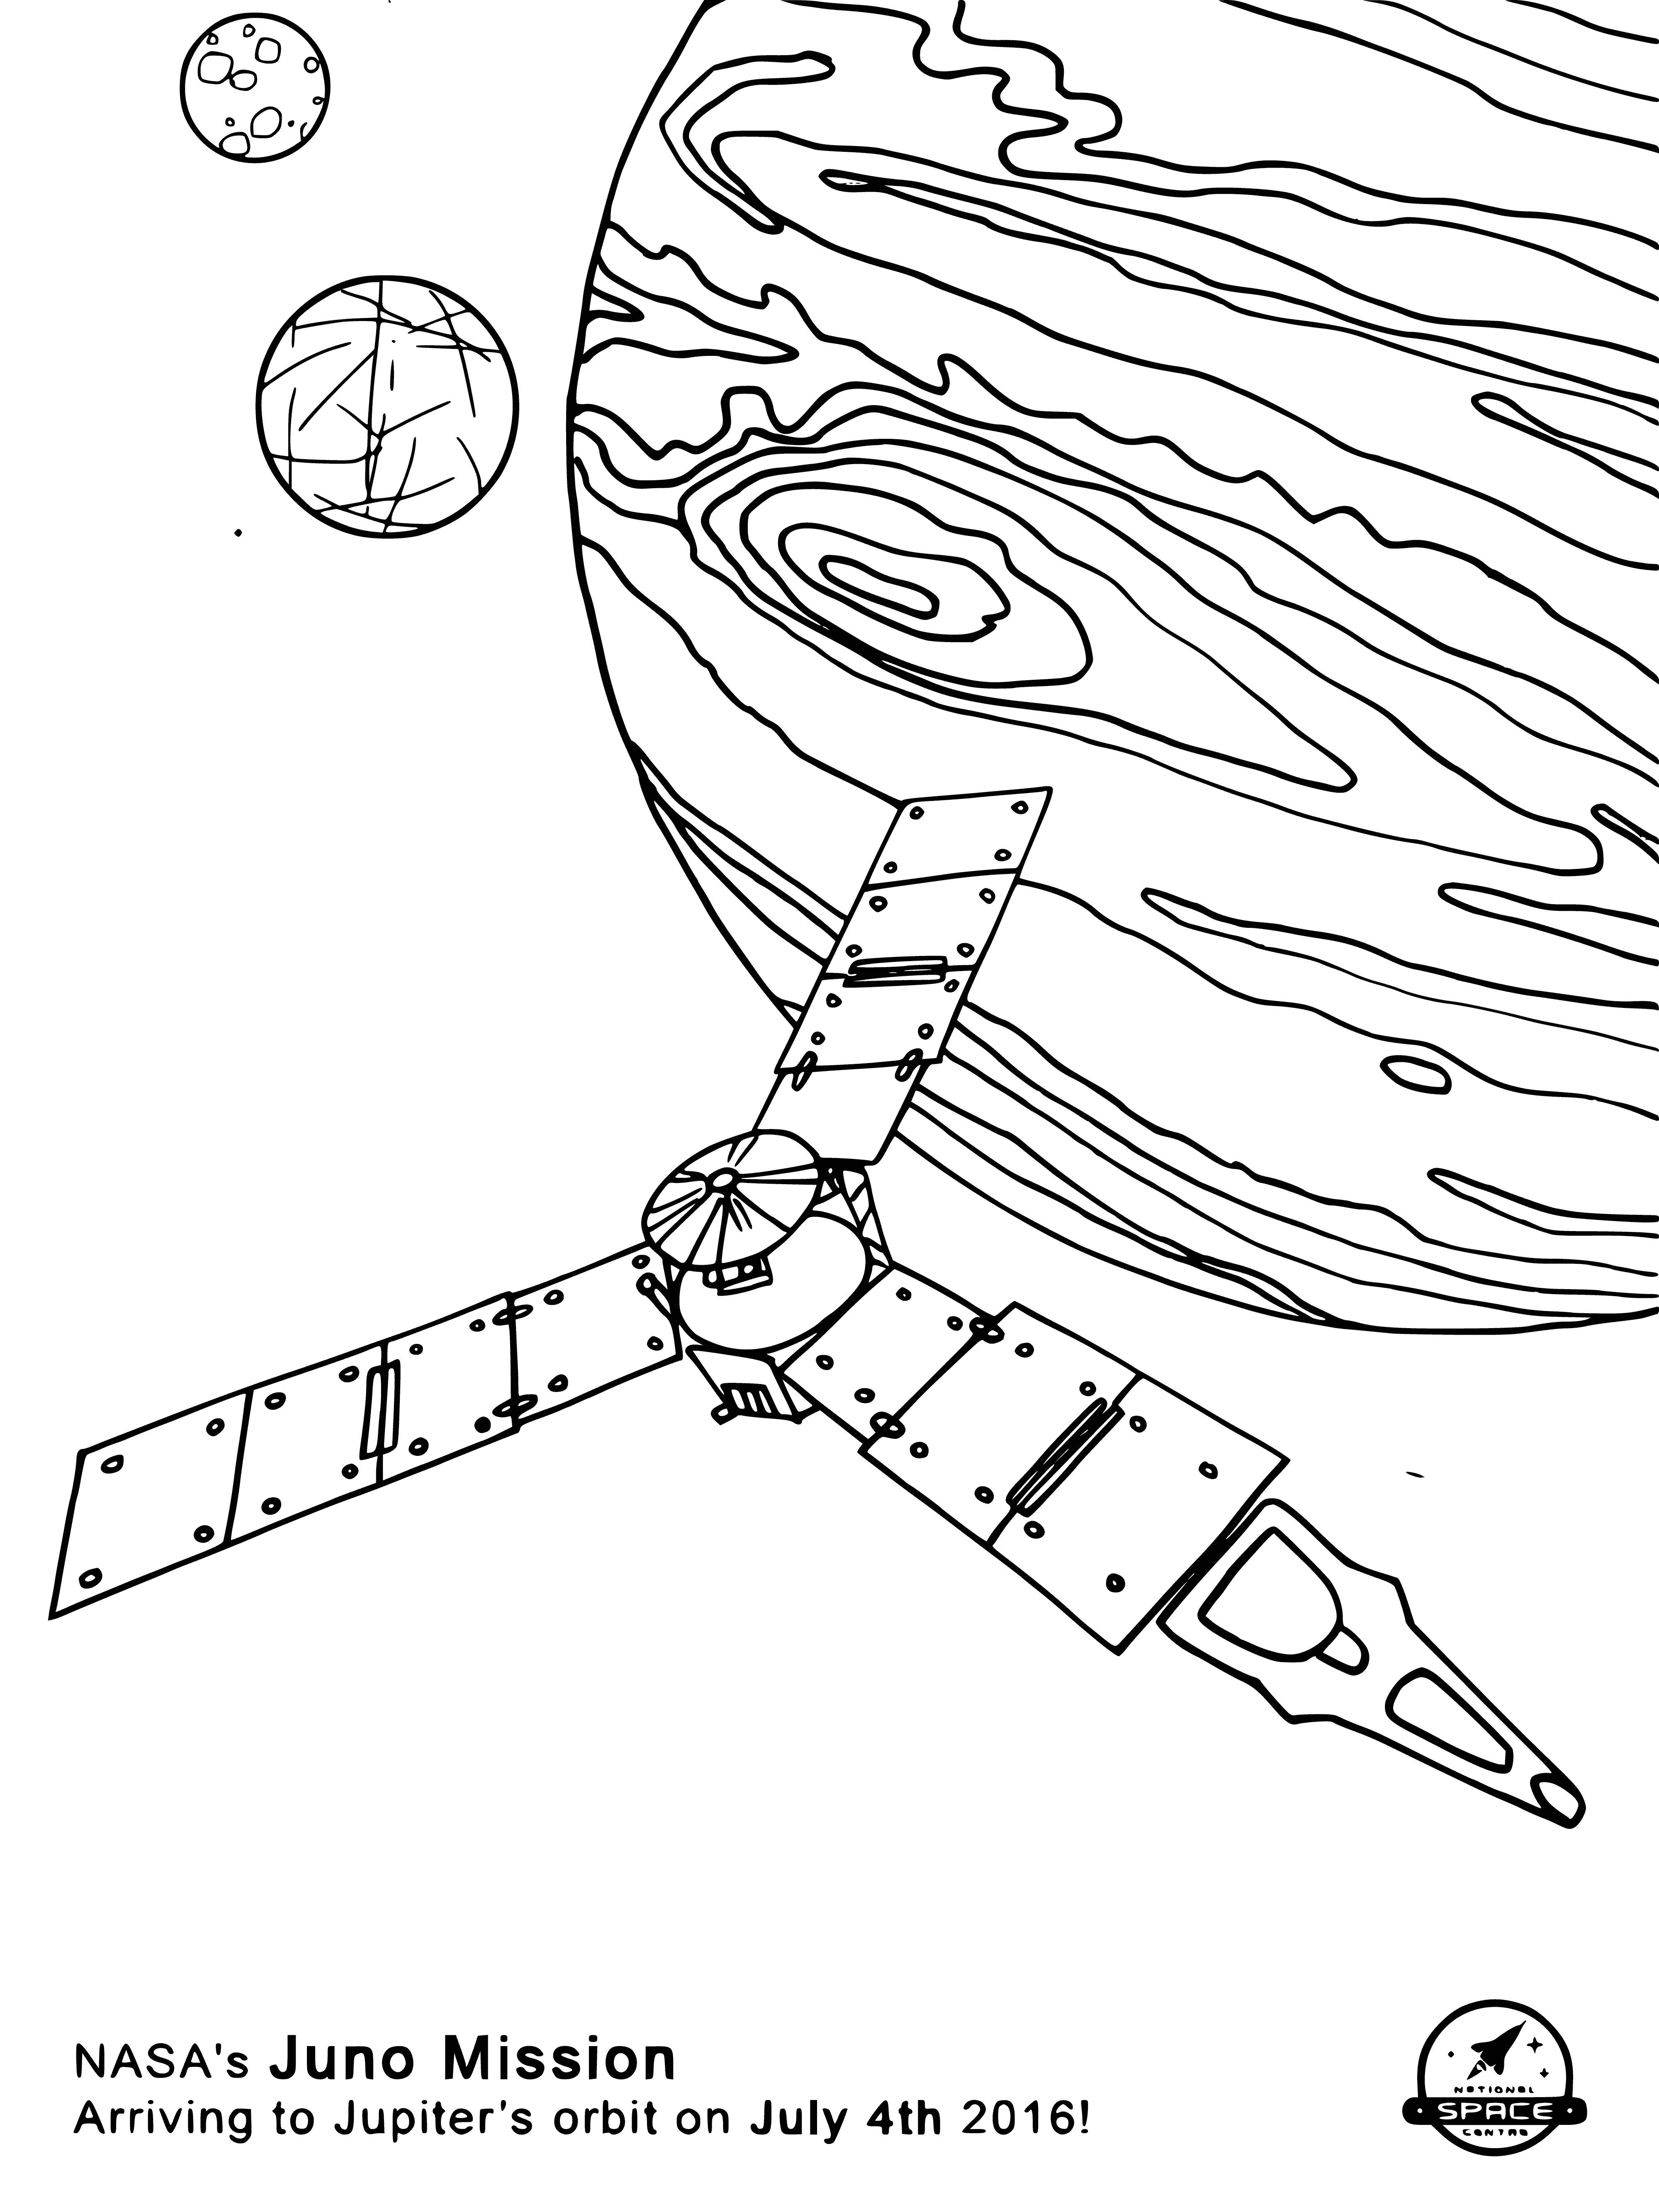 coloring page: Spacecraft arrives in Jupiter orbit; gas giant has hostile conditions & radiation, so craft has special shielding to protect occupants.